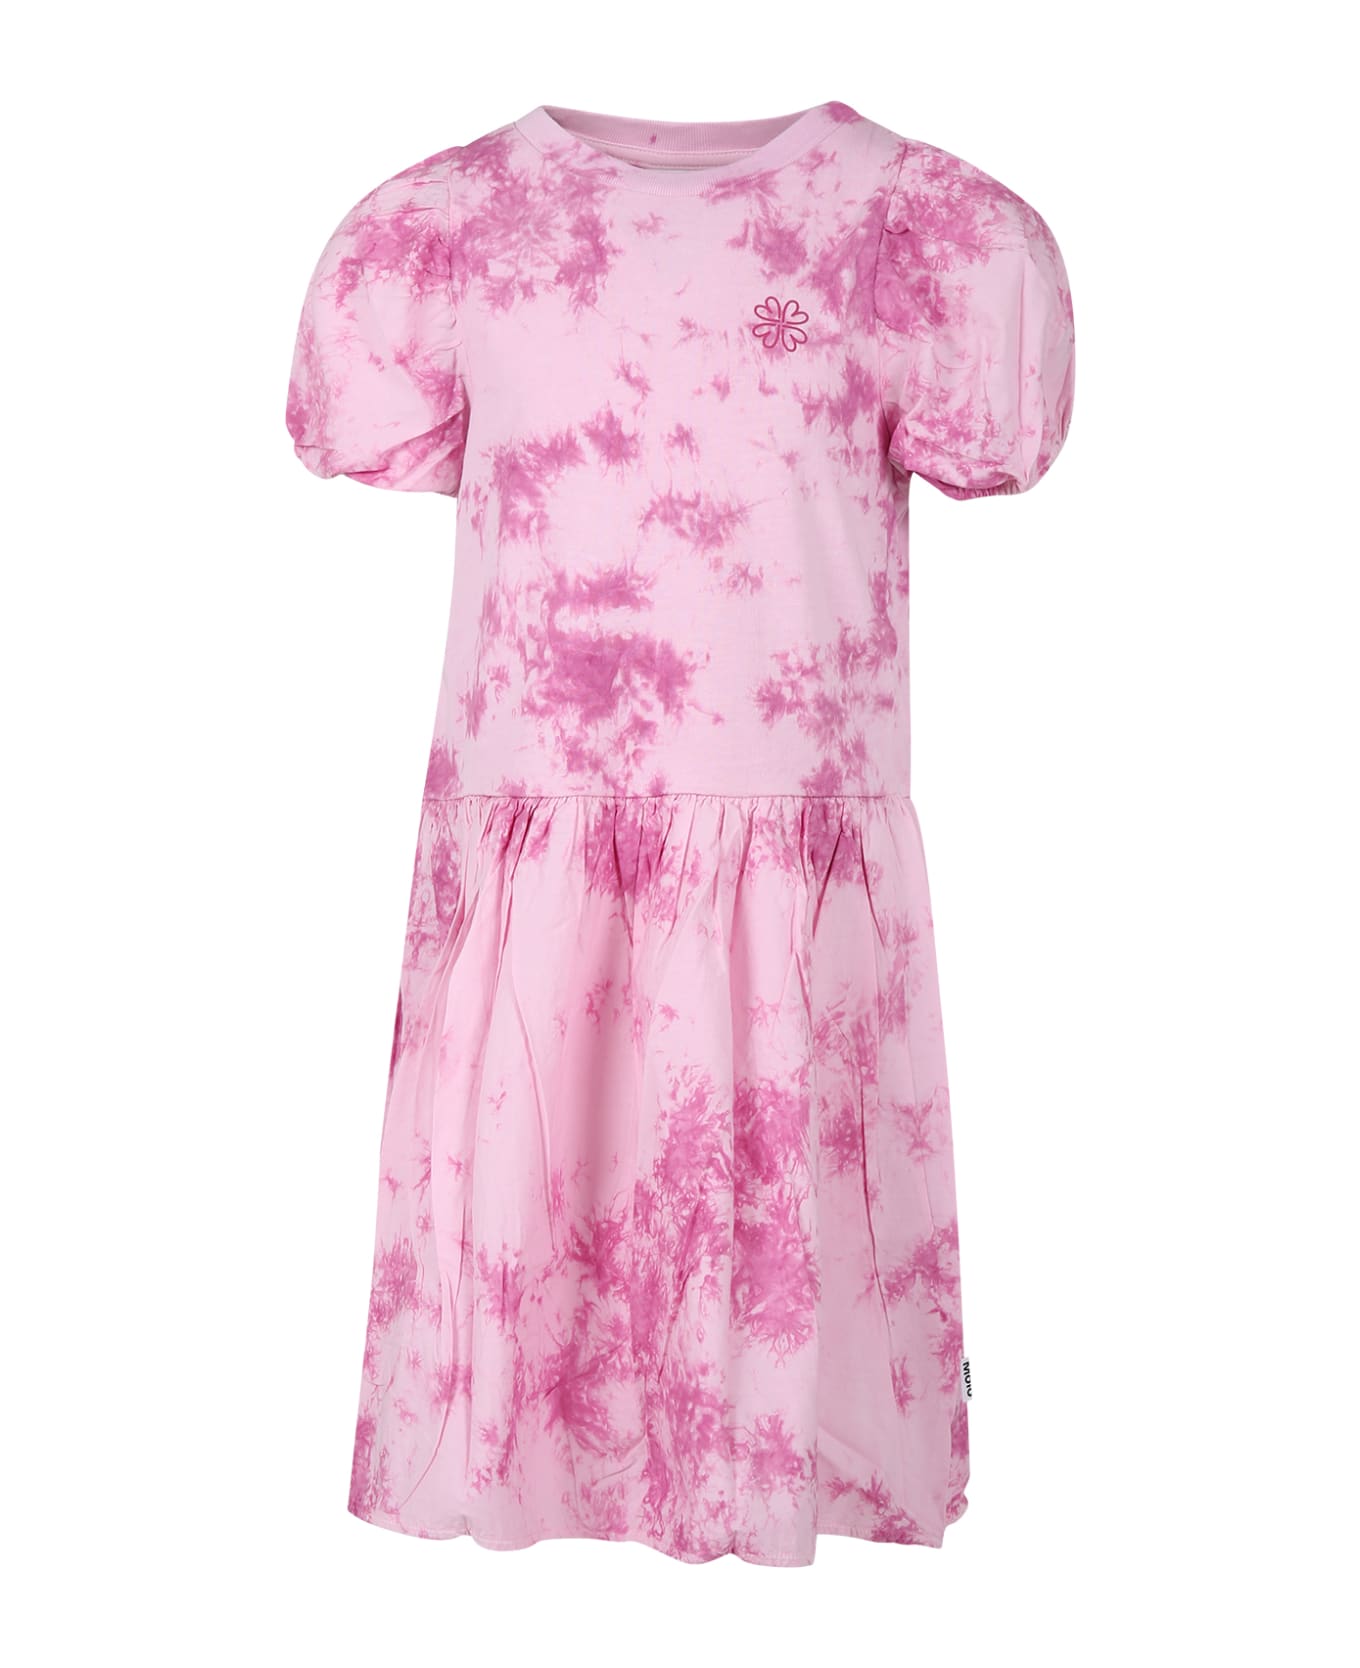 Molo Casual Pink Dress Chikako For Girl - Pink